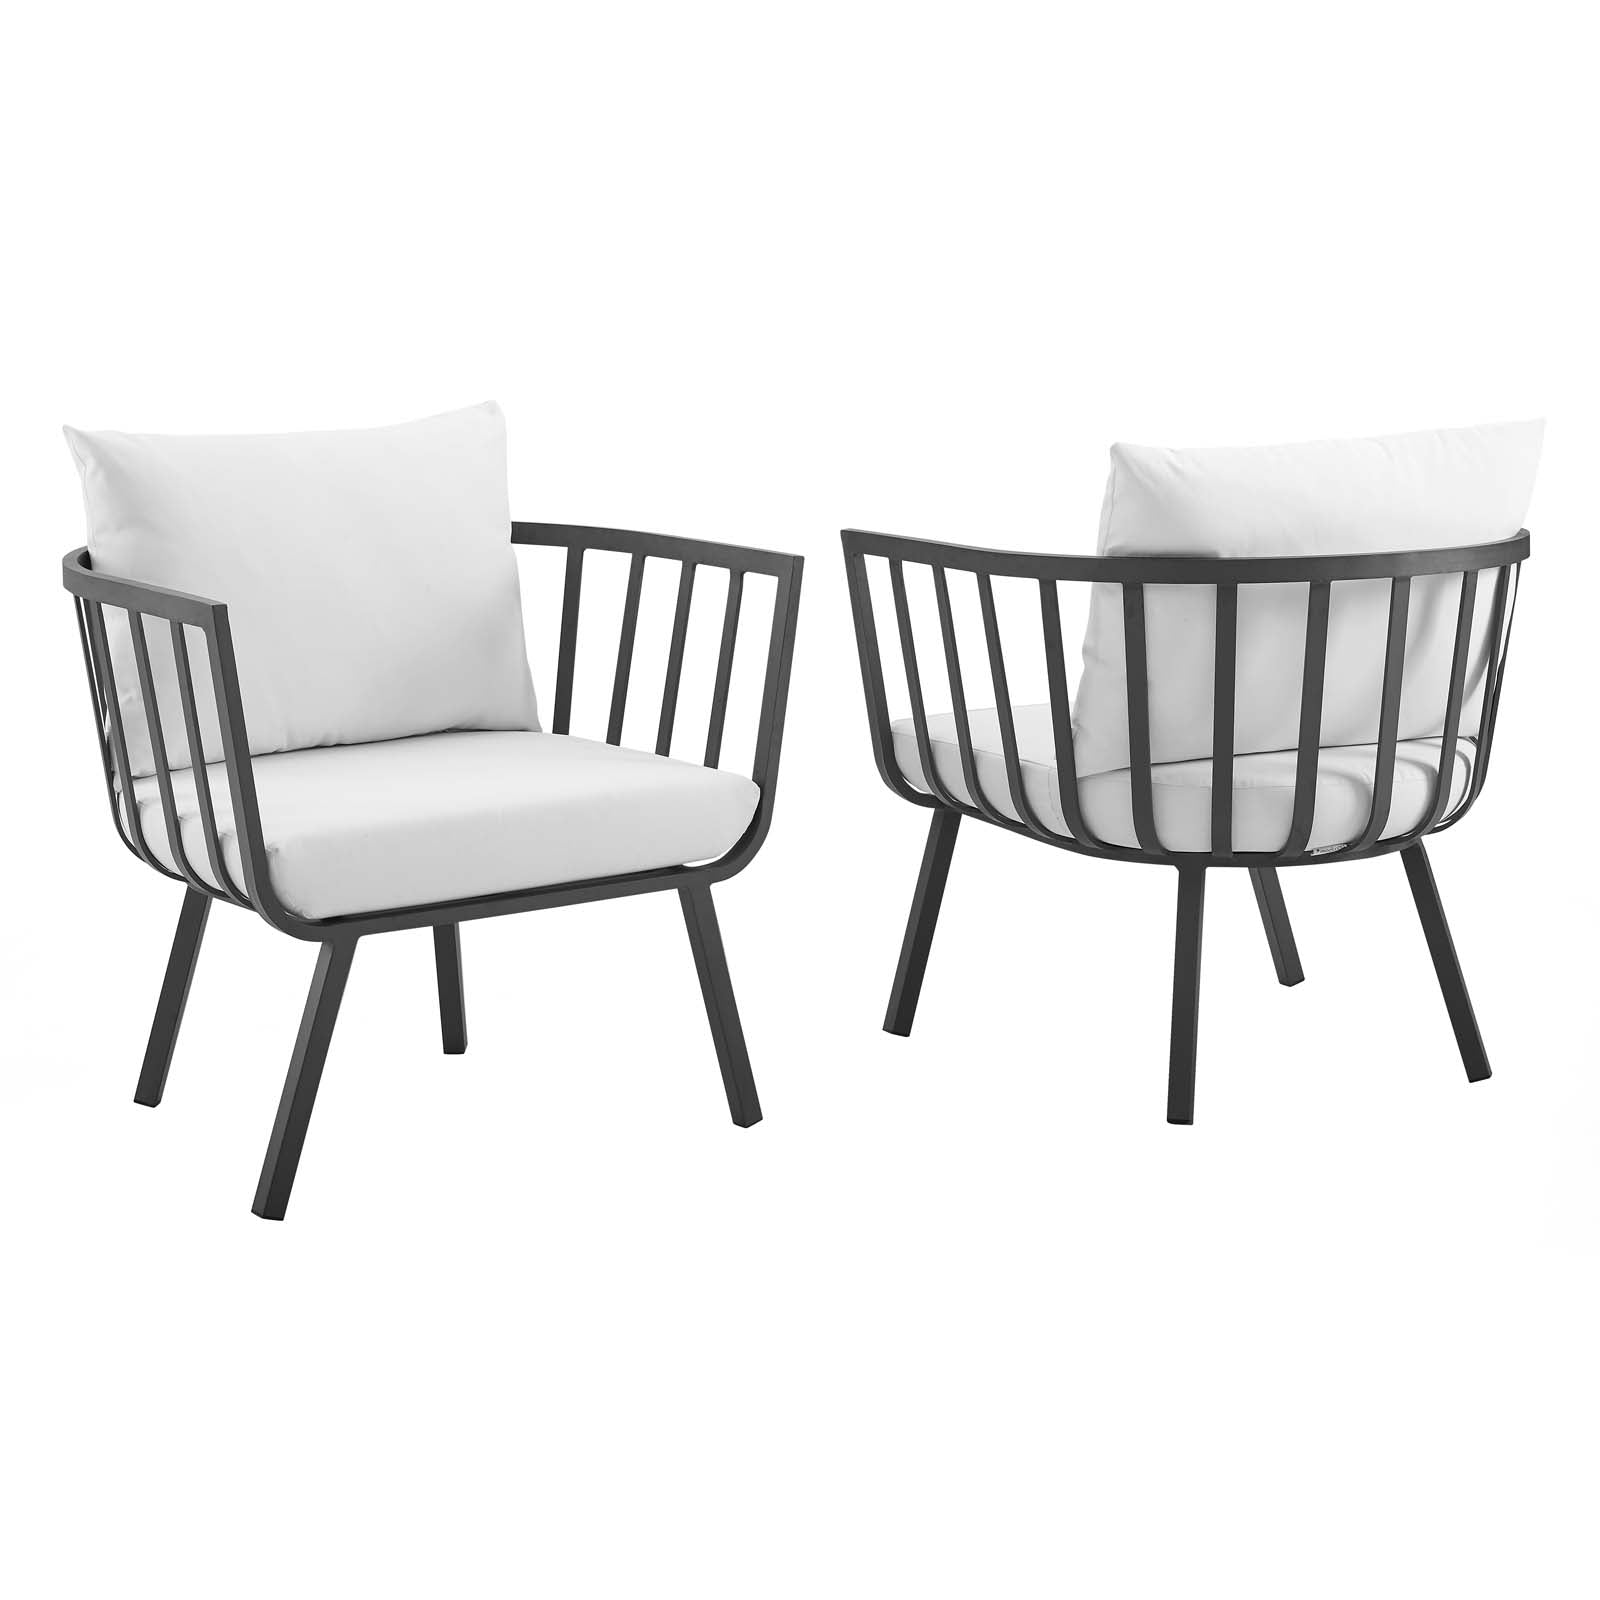 Modway Outdoor Chairs - Riverside Outdoor Patio Aluminum Armchair Set of 2 Gray White